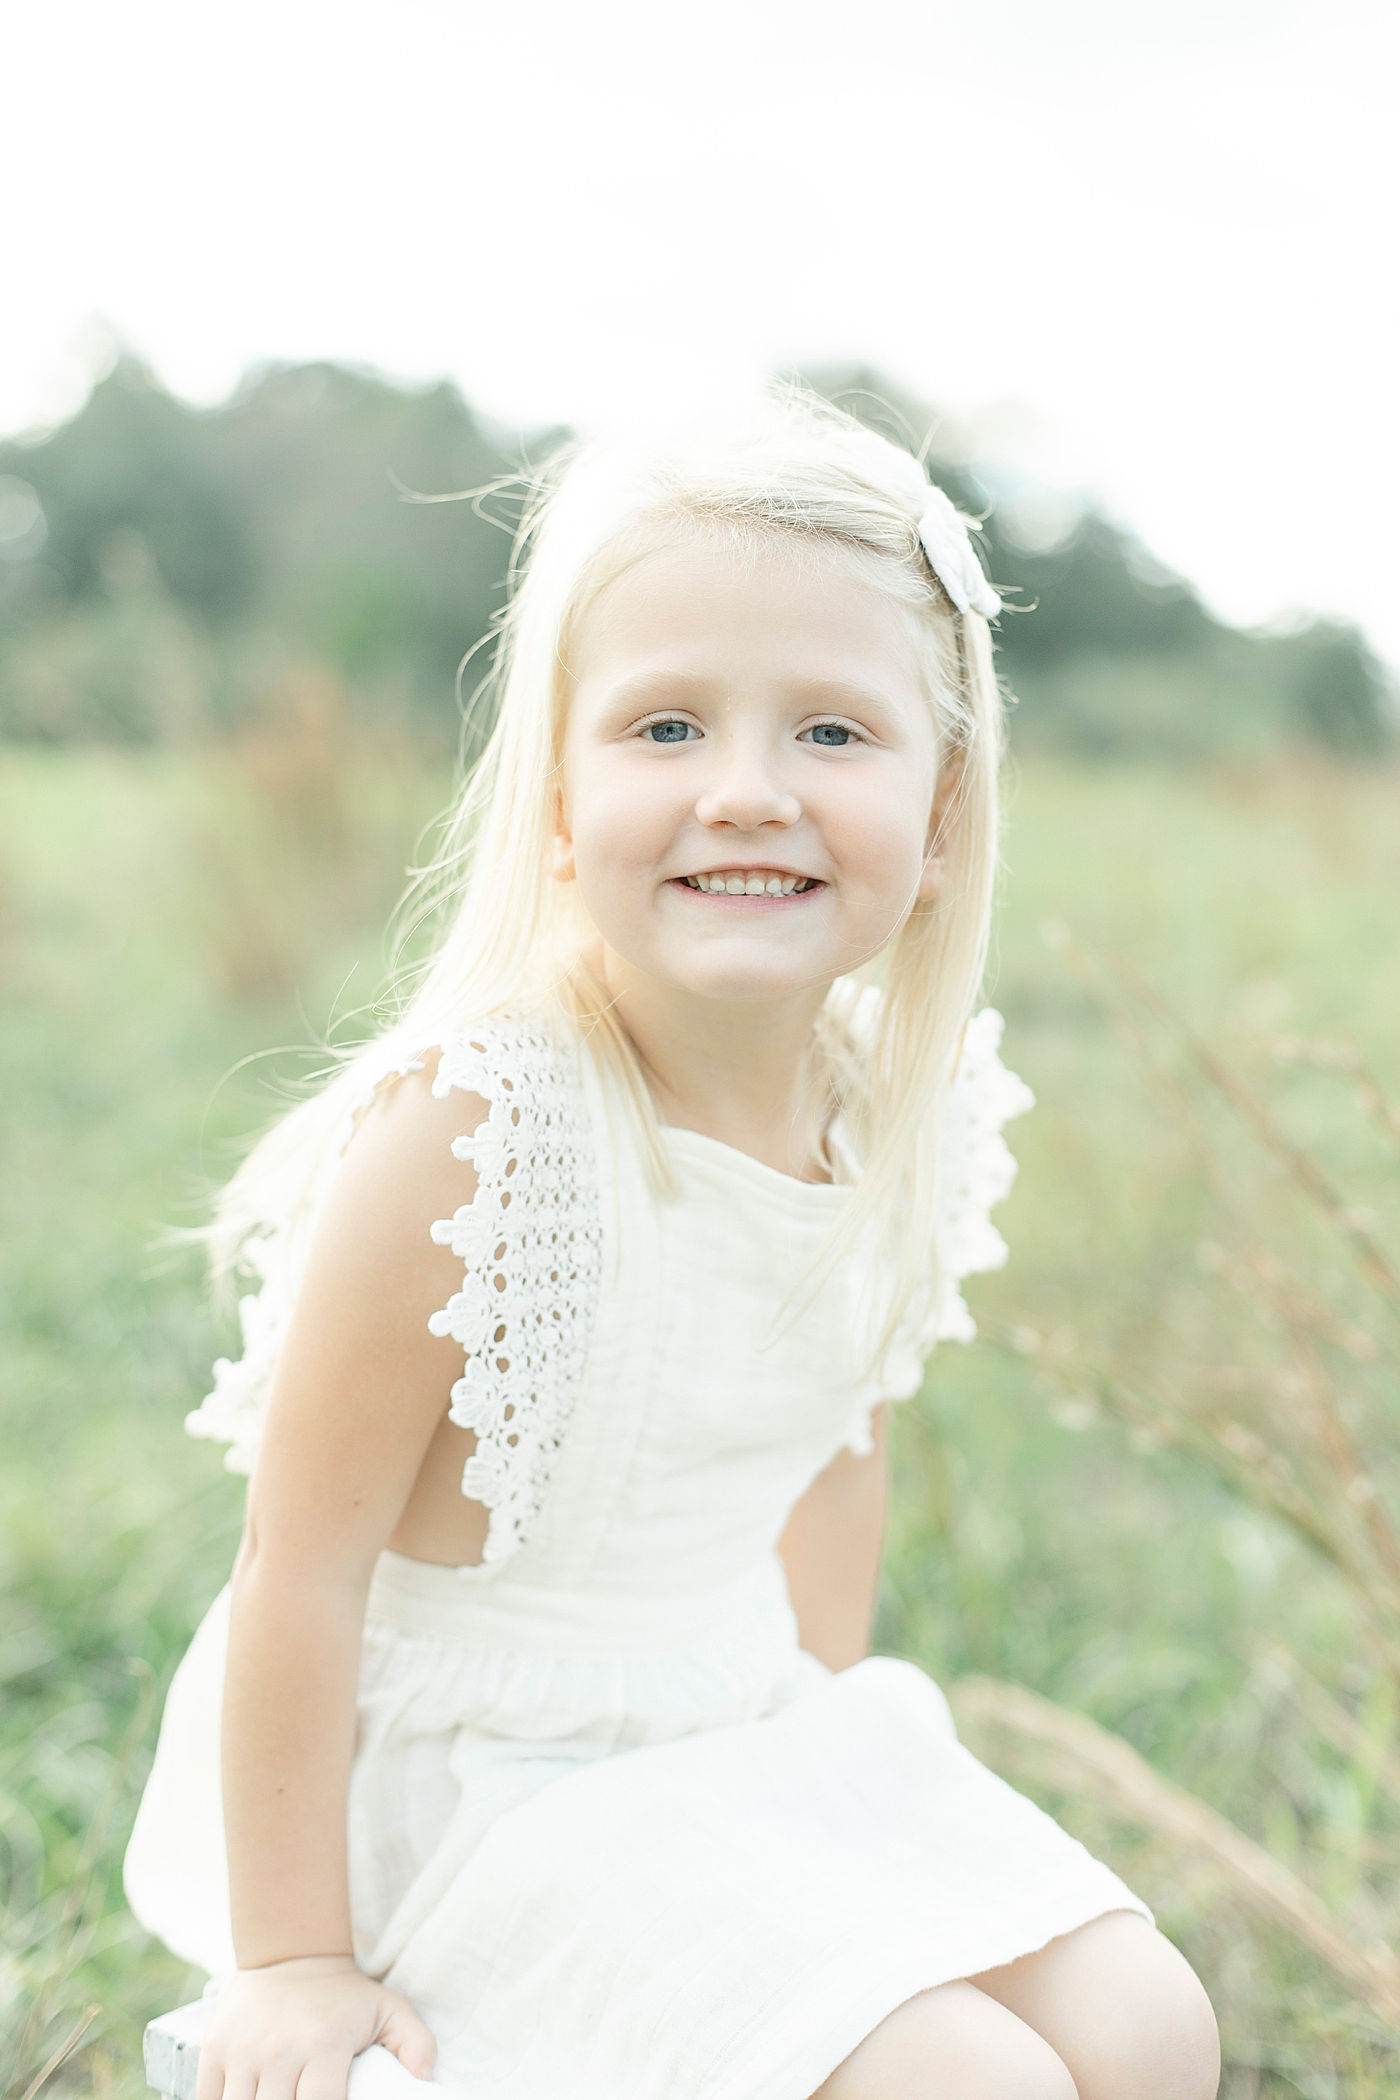 Little girl in a white dress sitting in a field | Photo by Hattiesburg MS family photographer Little Sunshine Photography 